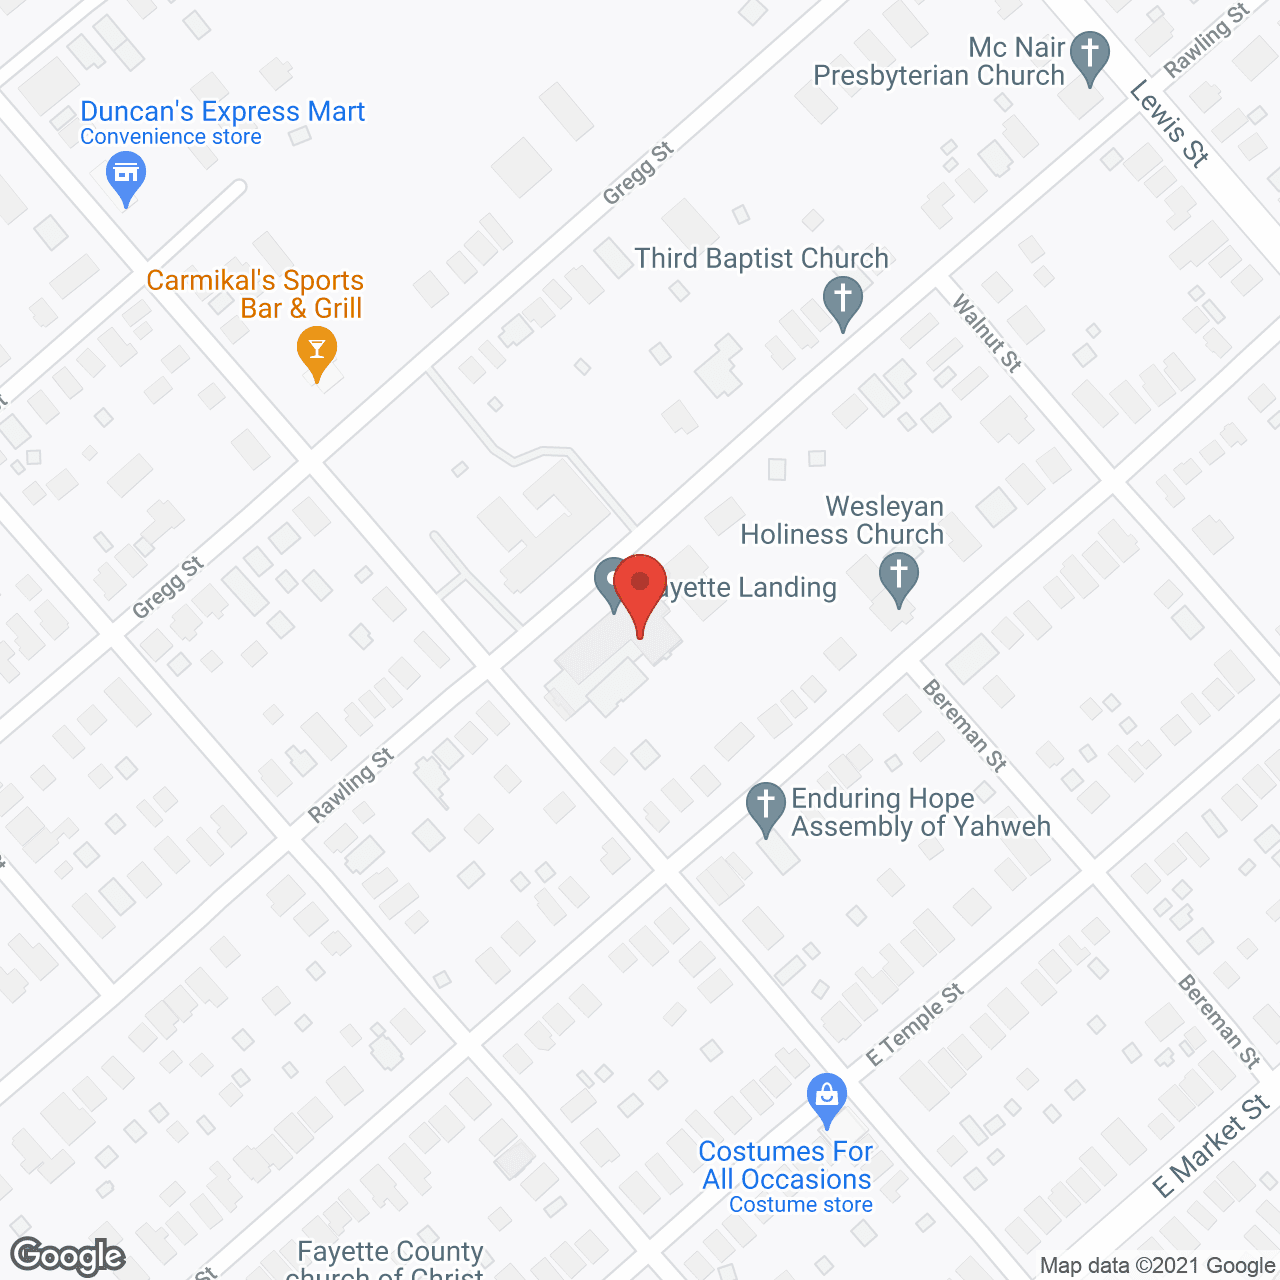 Wintersong Adult Care Ctr - CLOSED in google map